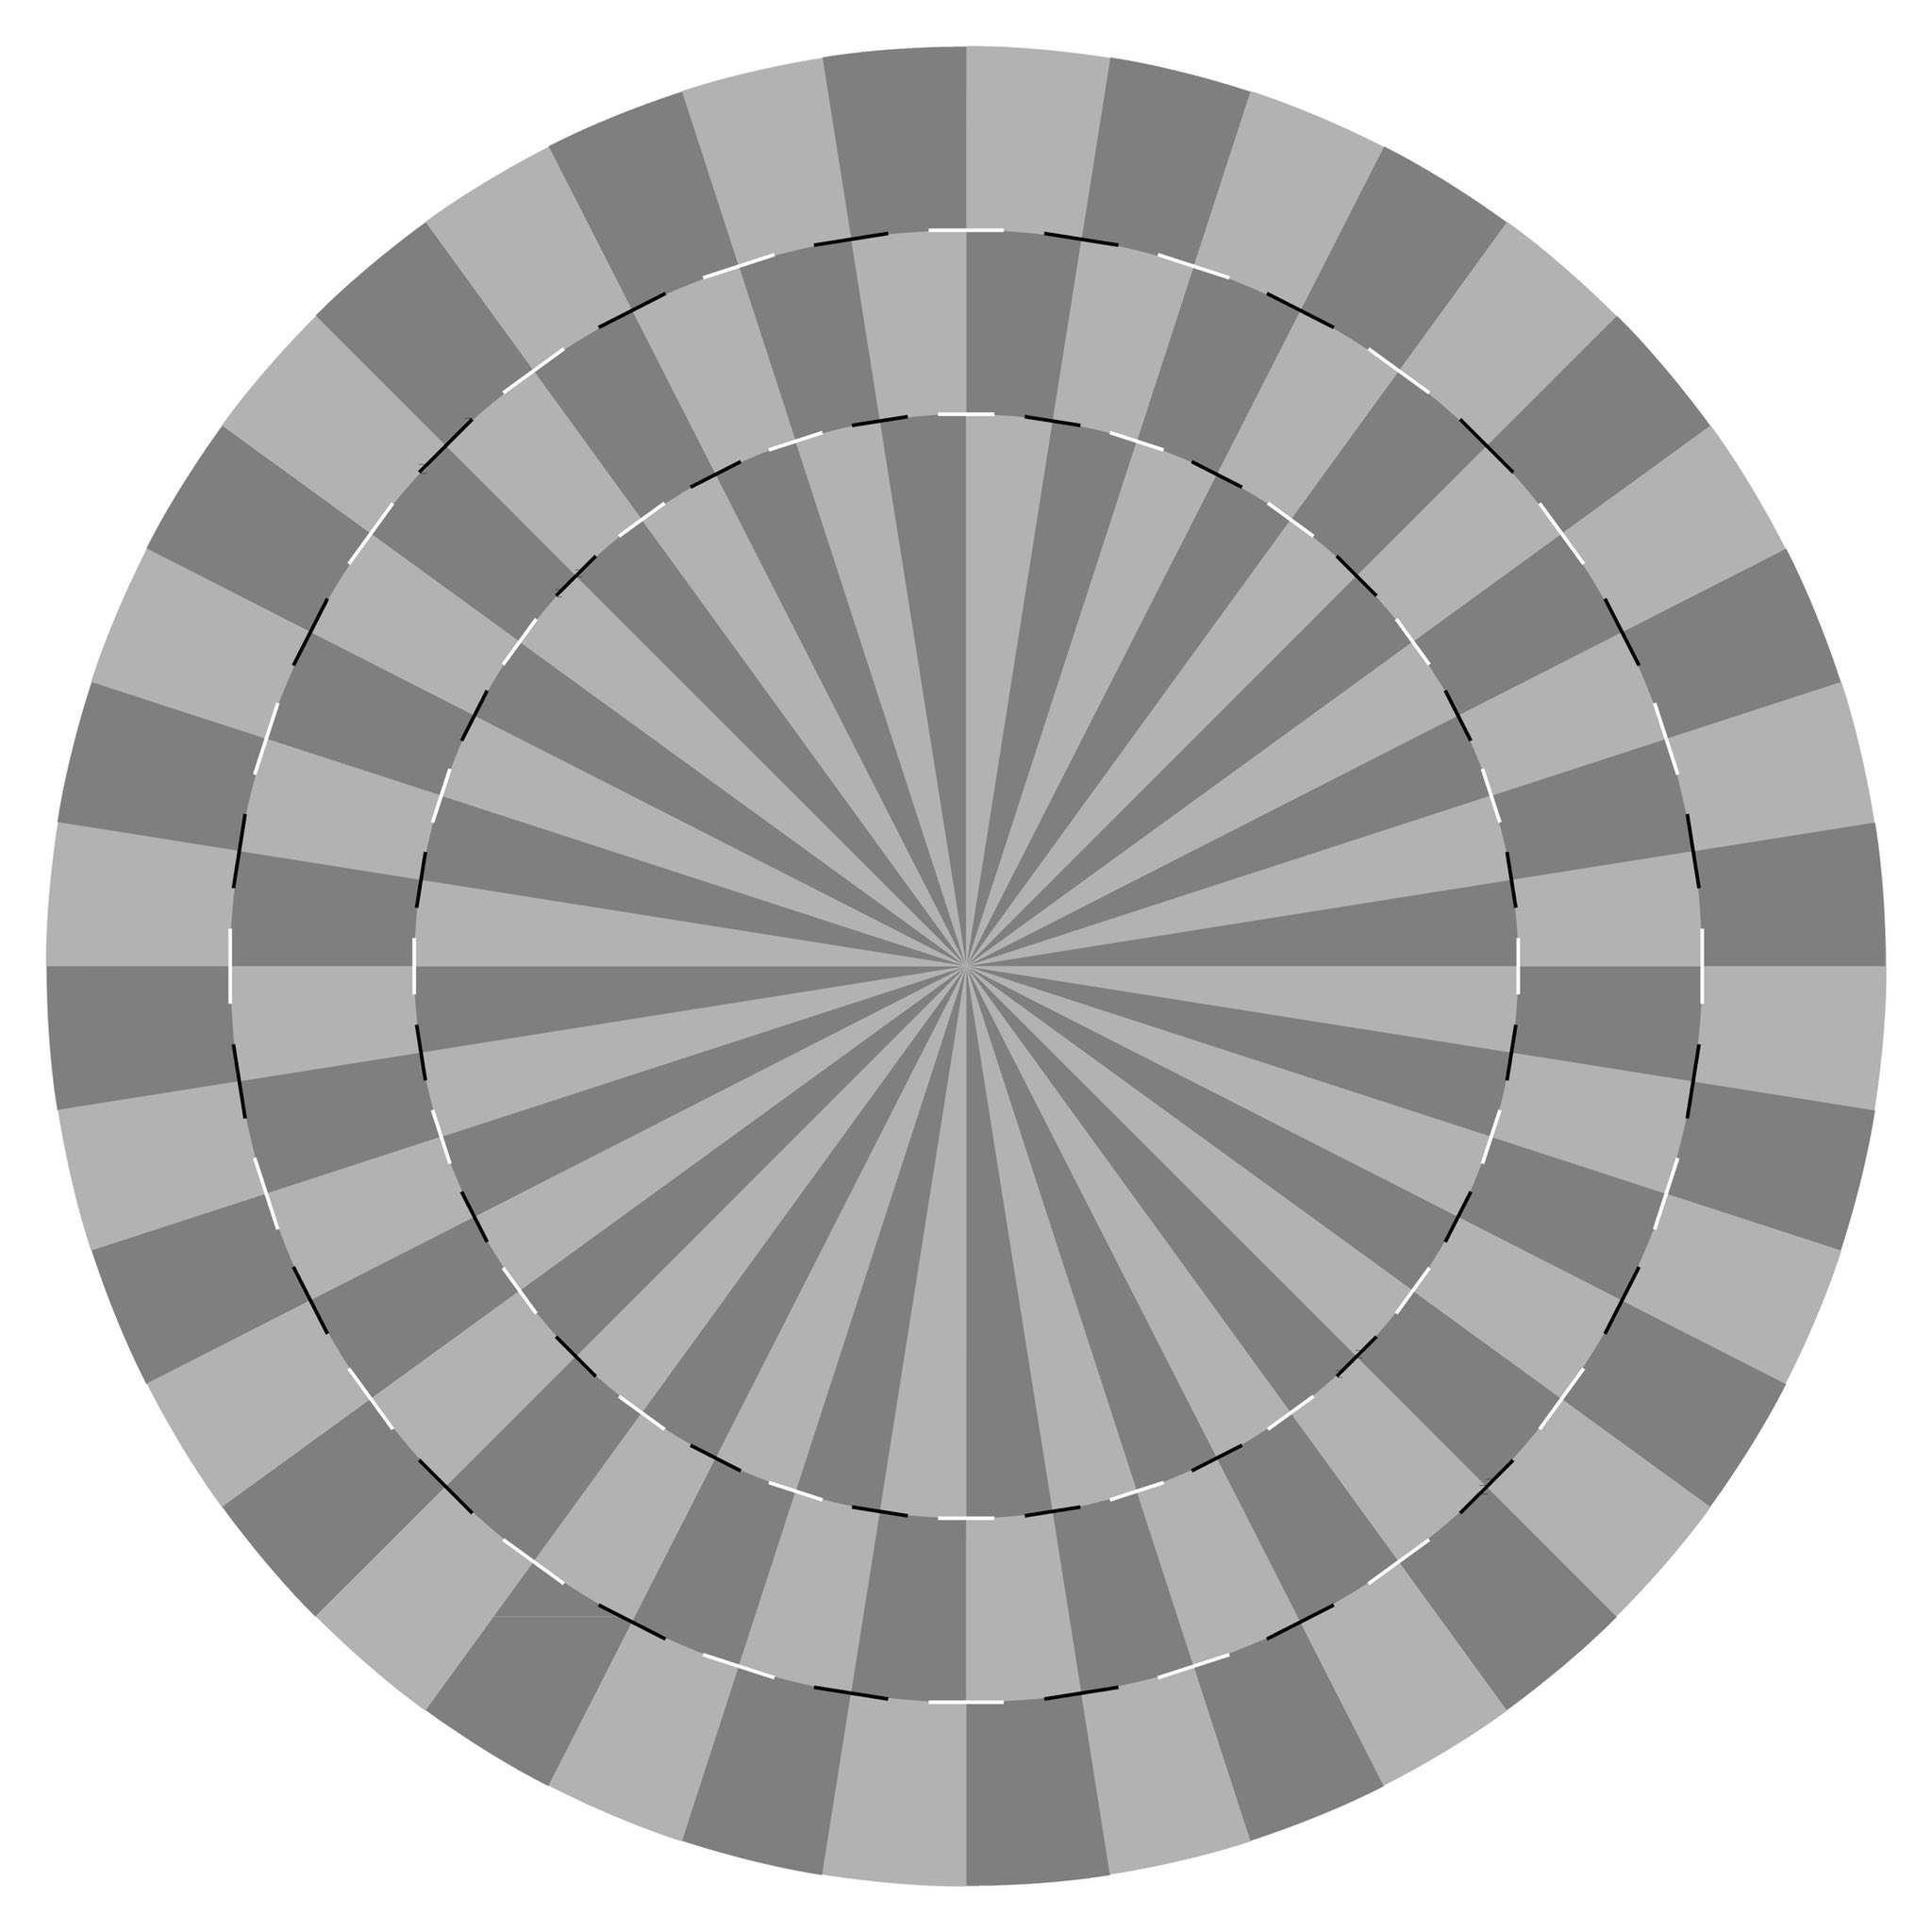 Optical illusion: Three concentric circles that look anything but!